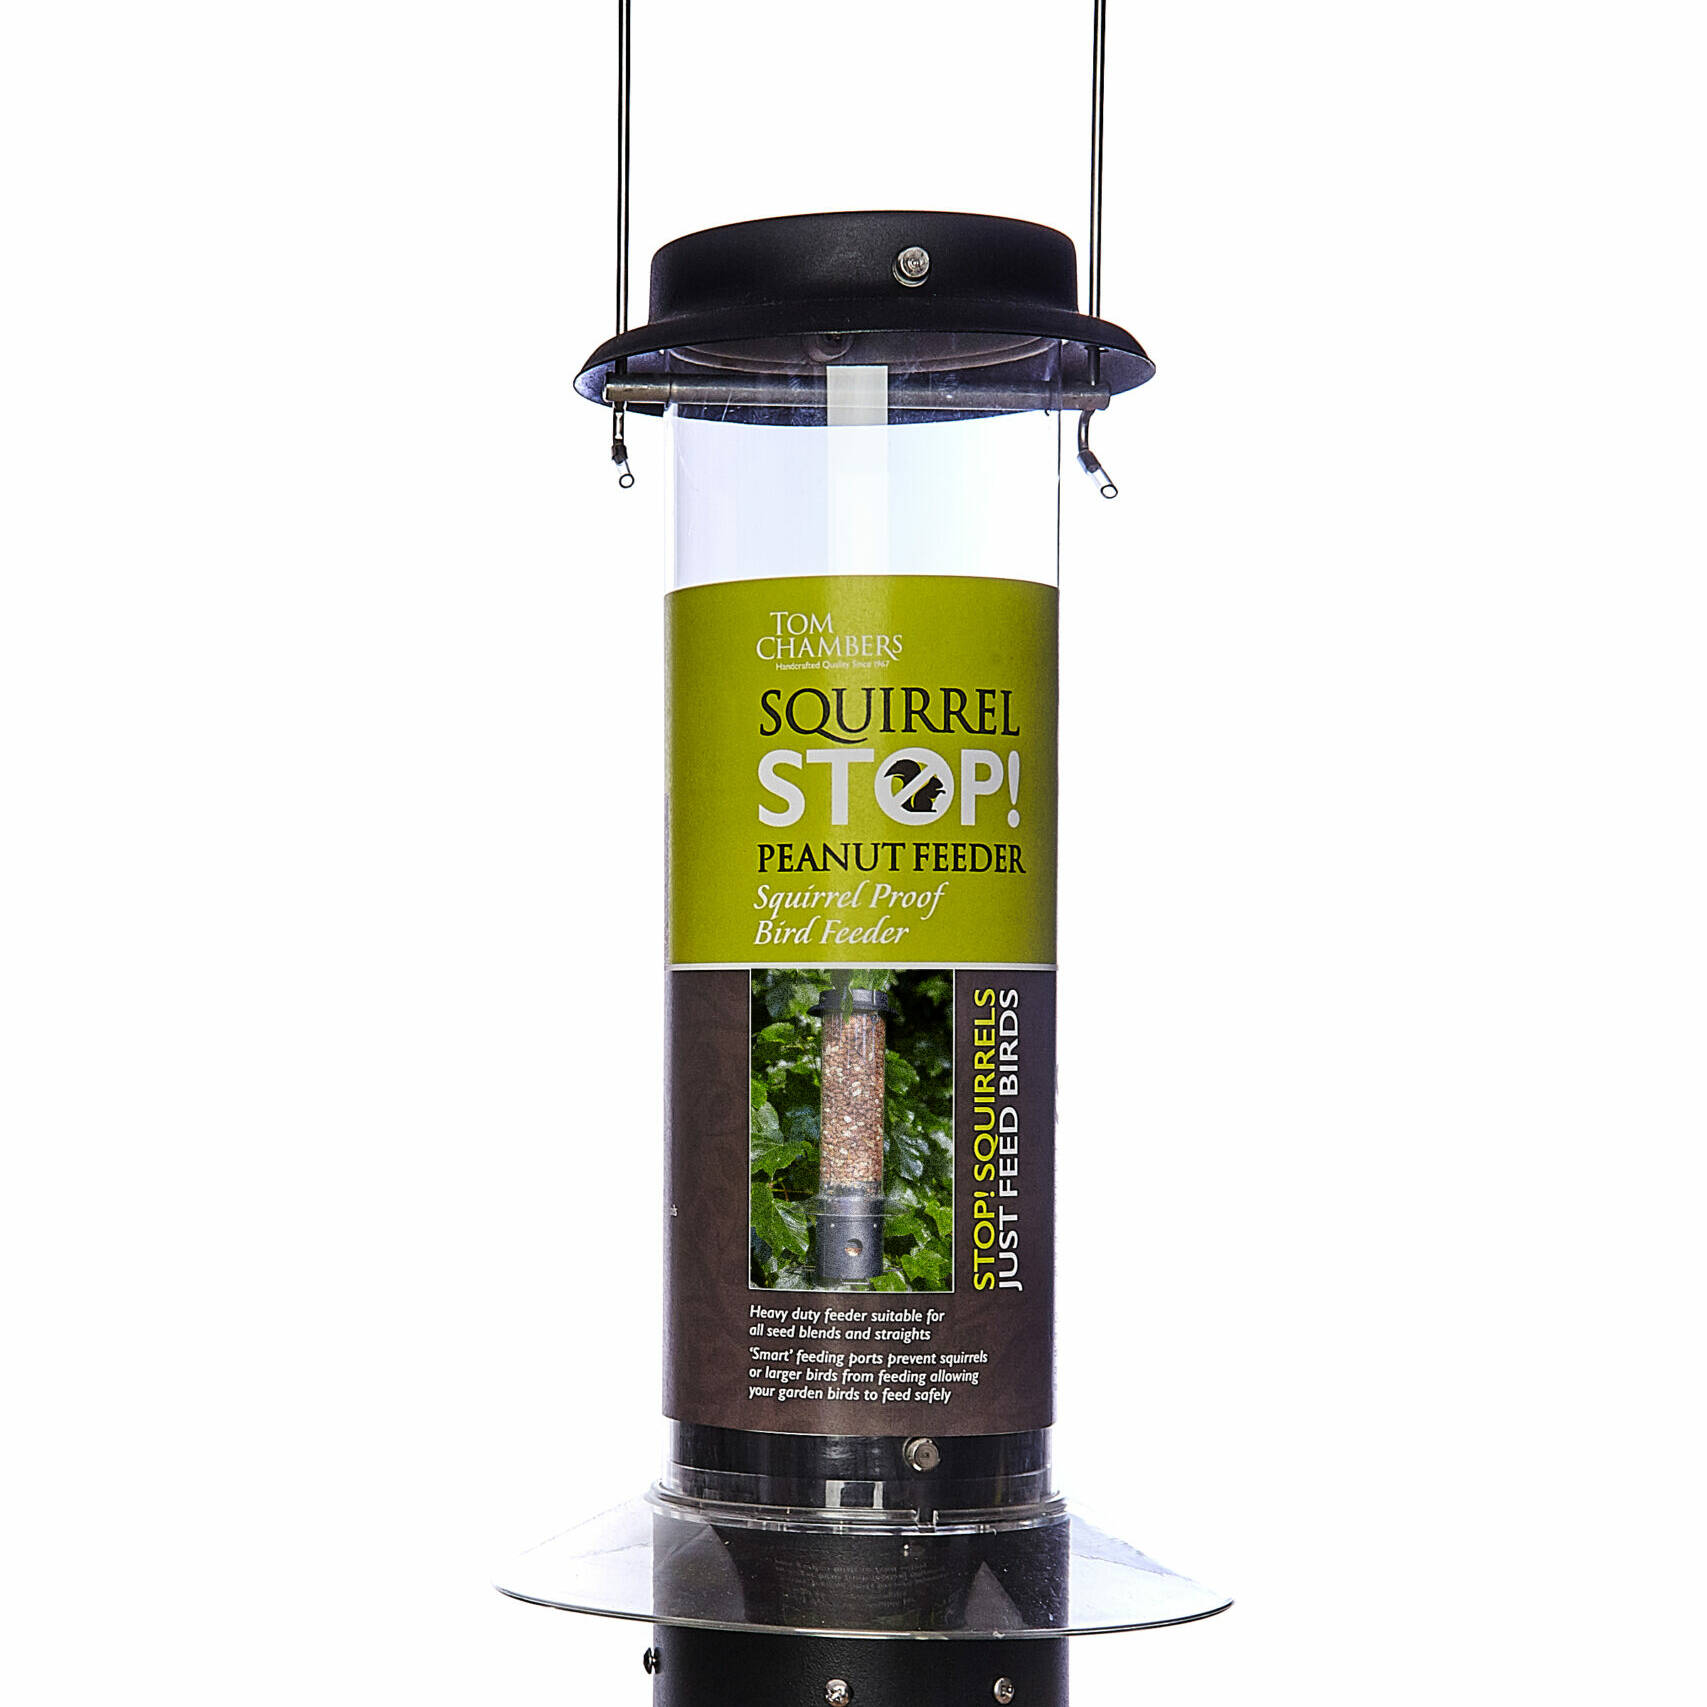 Tom chambers Squirrel Stop Peanut Feeder